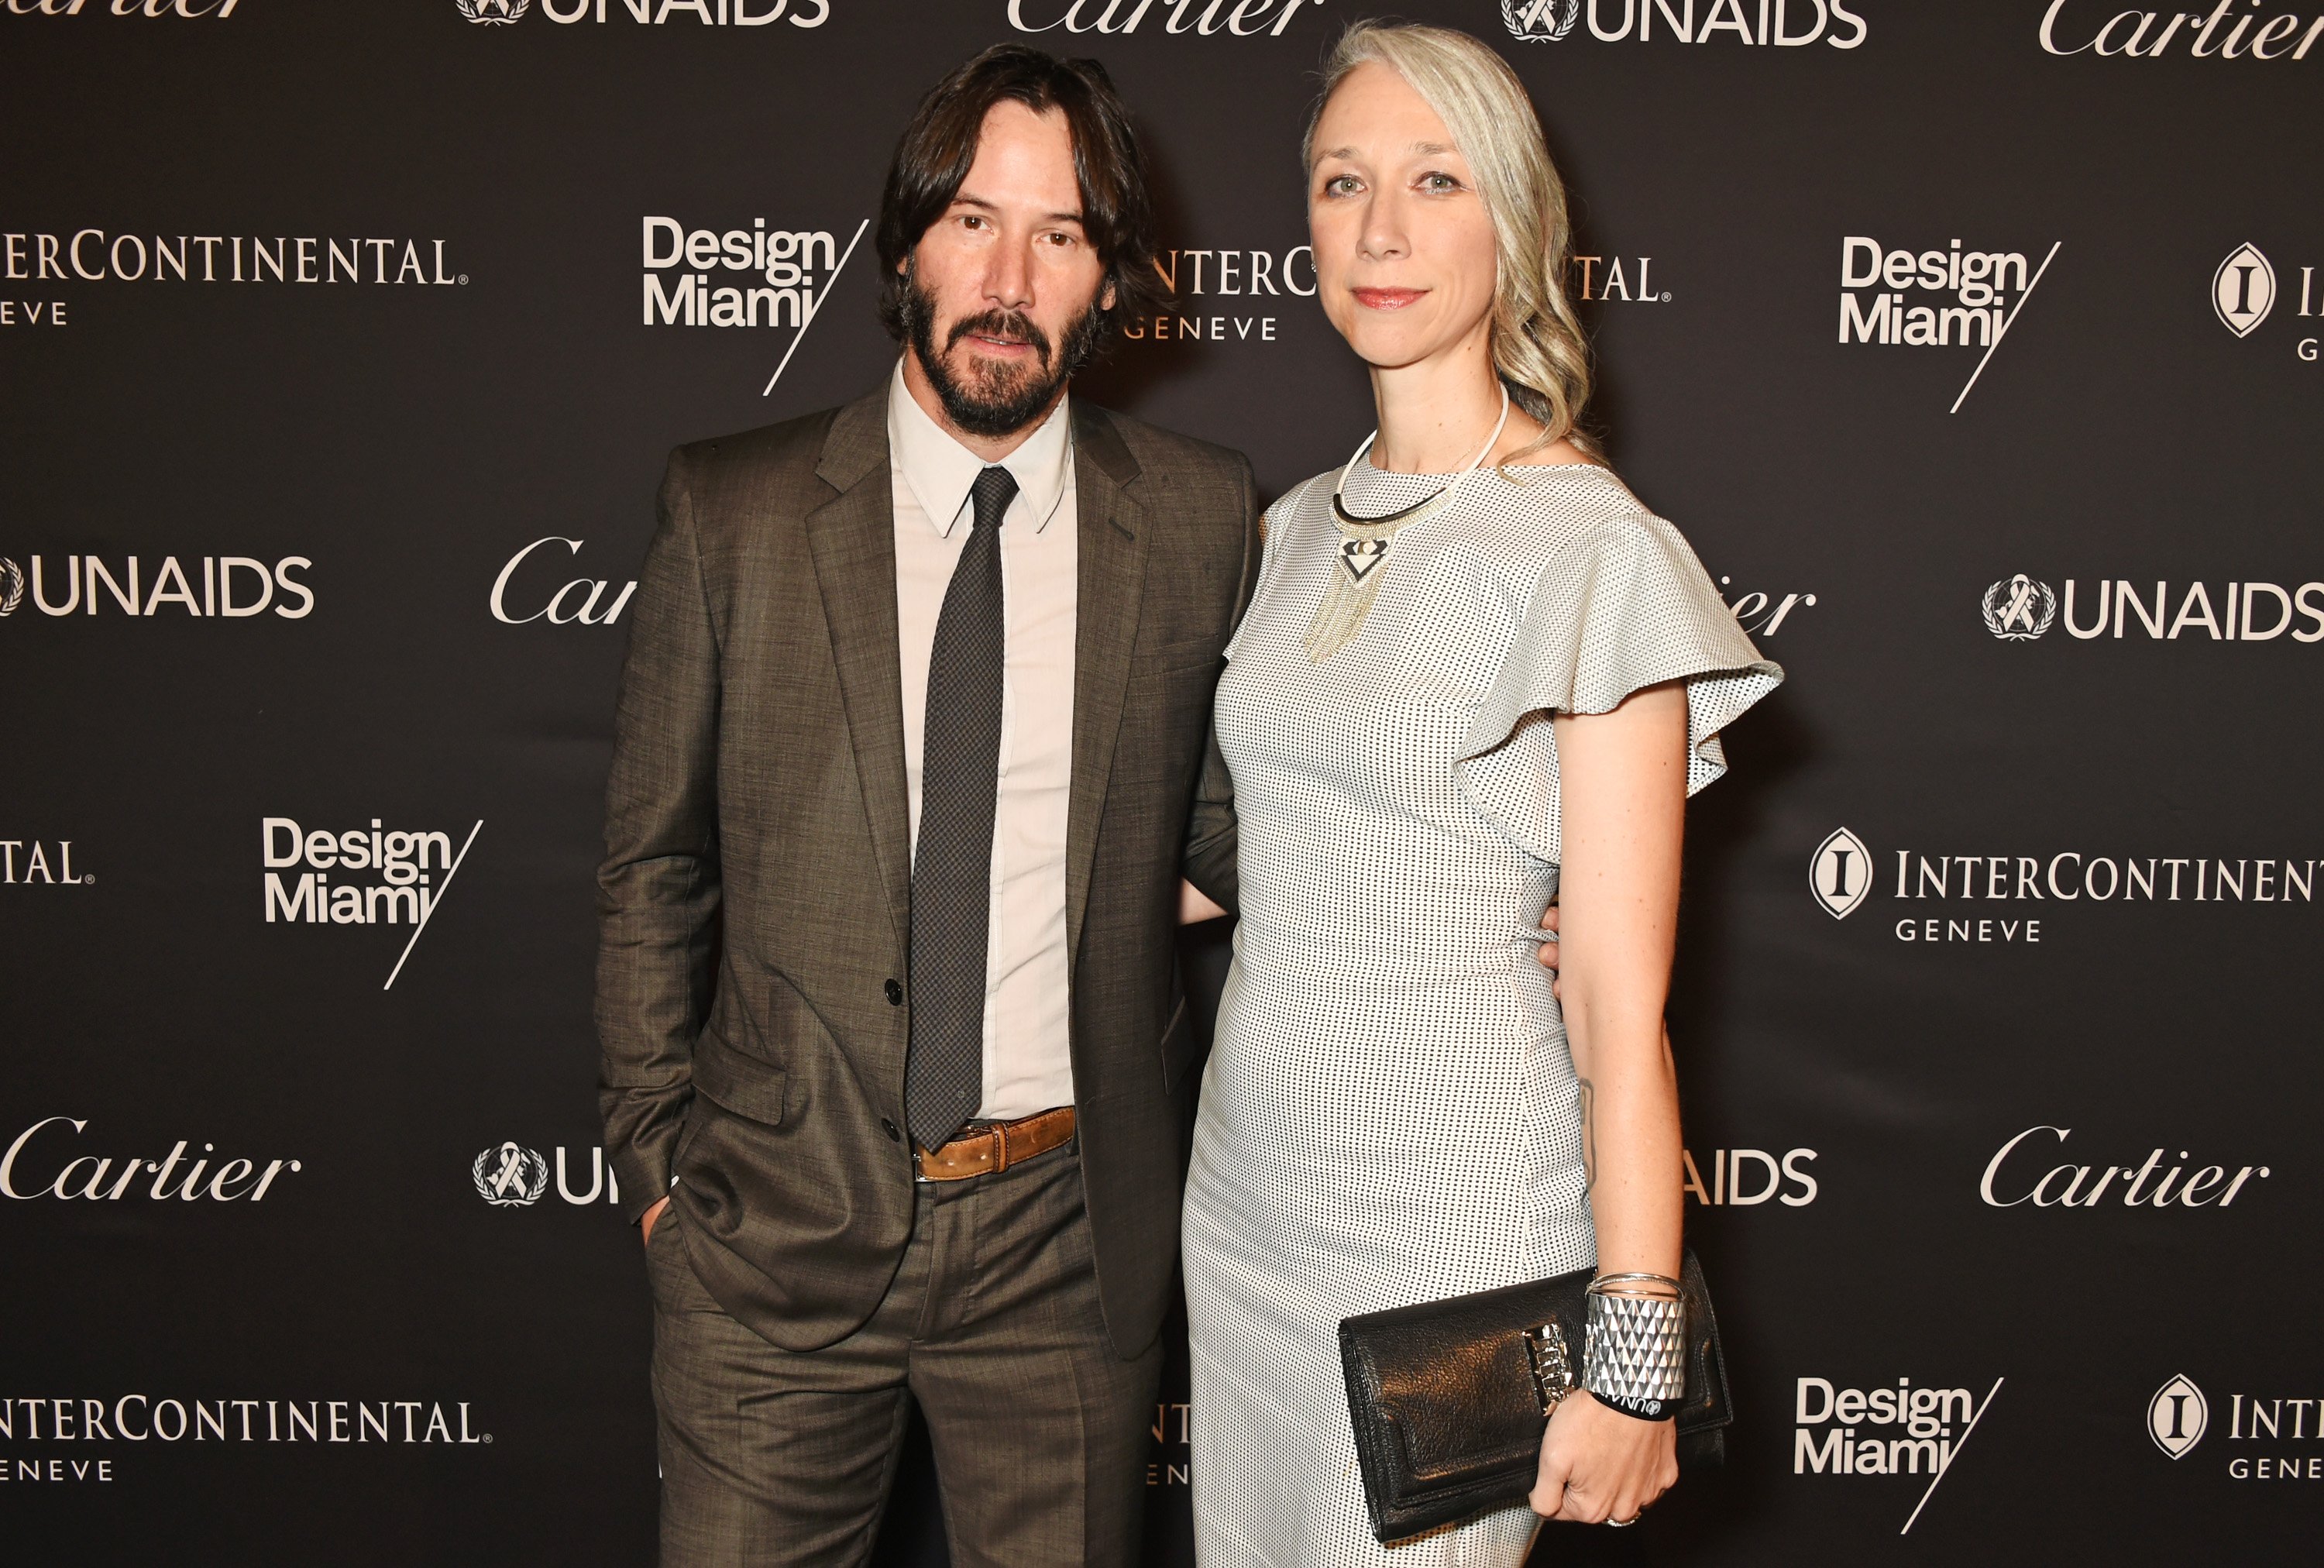 Keanu Reeves (L) and artist Alexandra Grant attend the UNAIDS Gala during Art Basel 2016 at Design Miami/ Basel on June 13, 2016, in Basel, Switzerland. | Source: Getty Images.